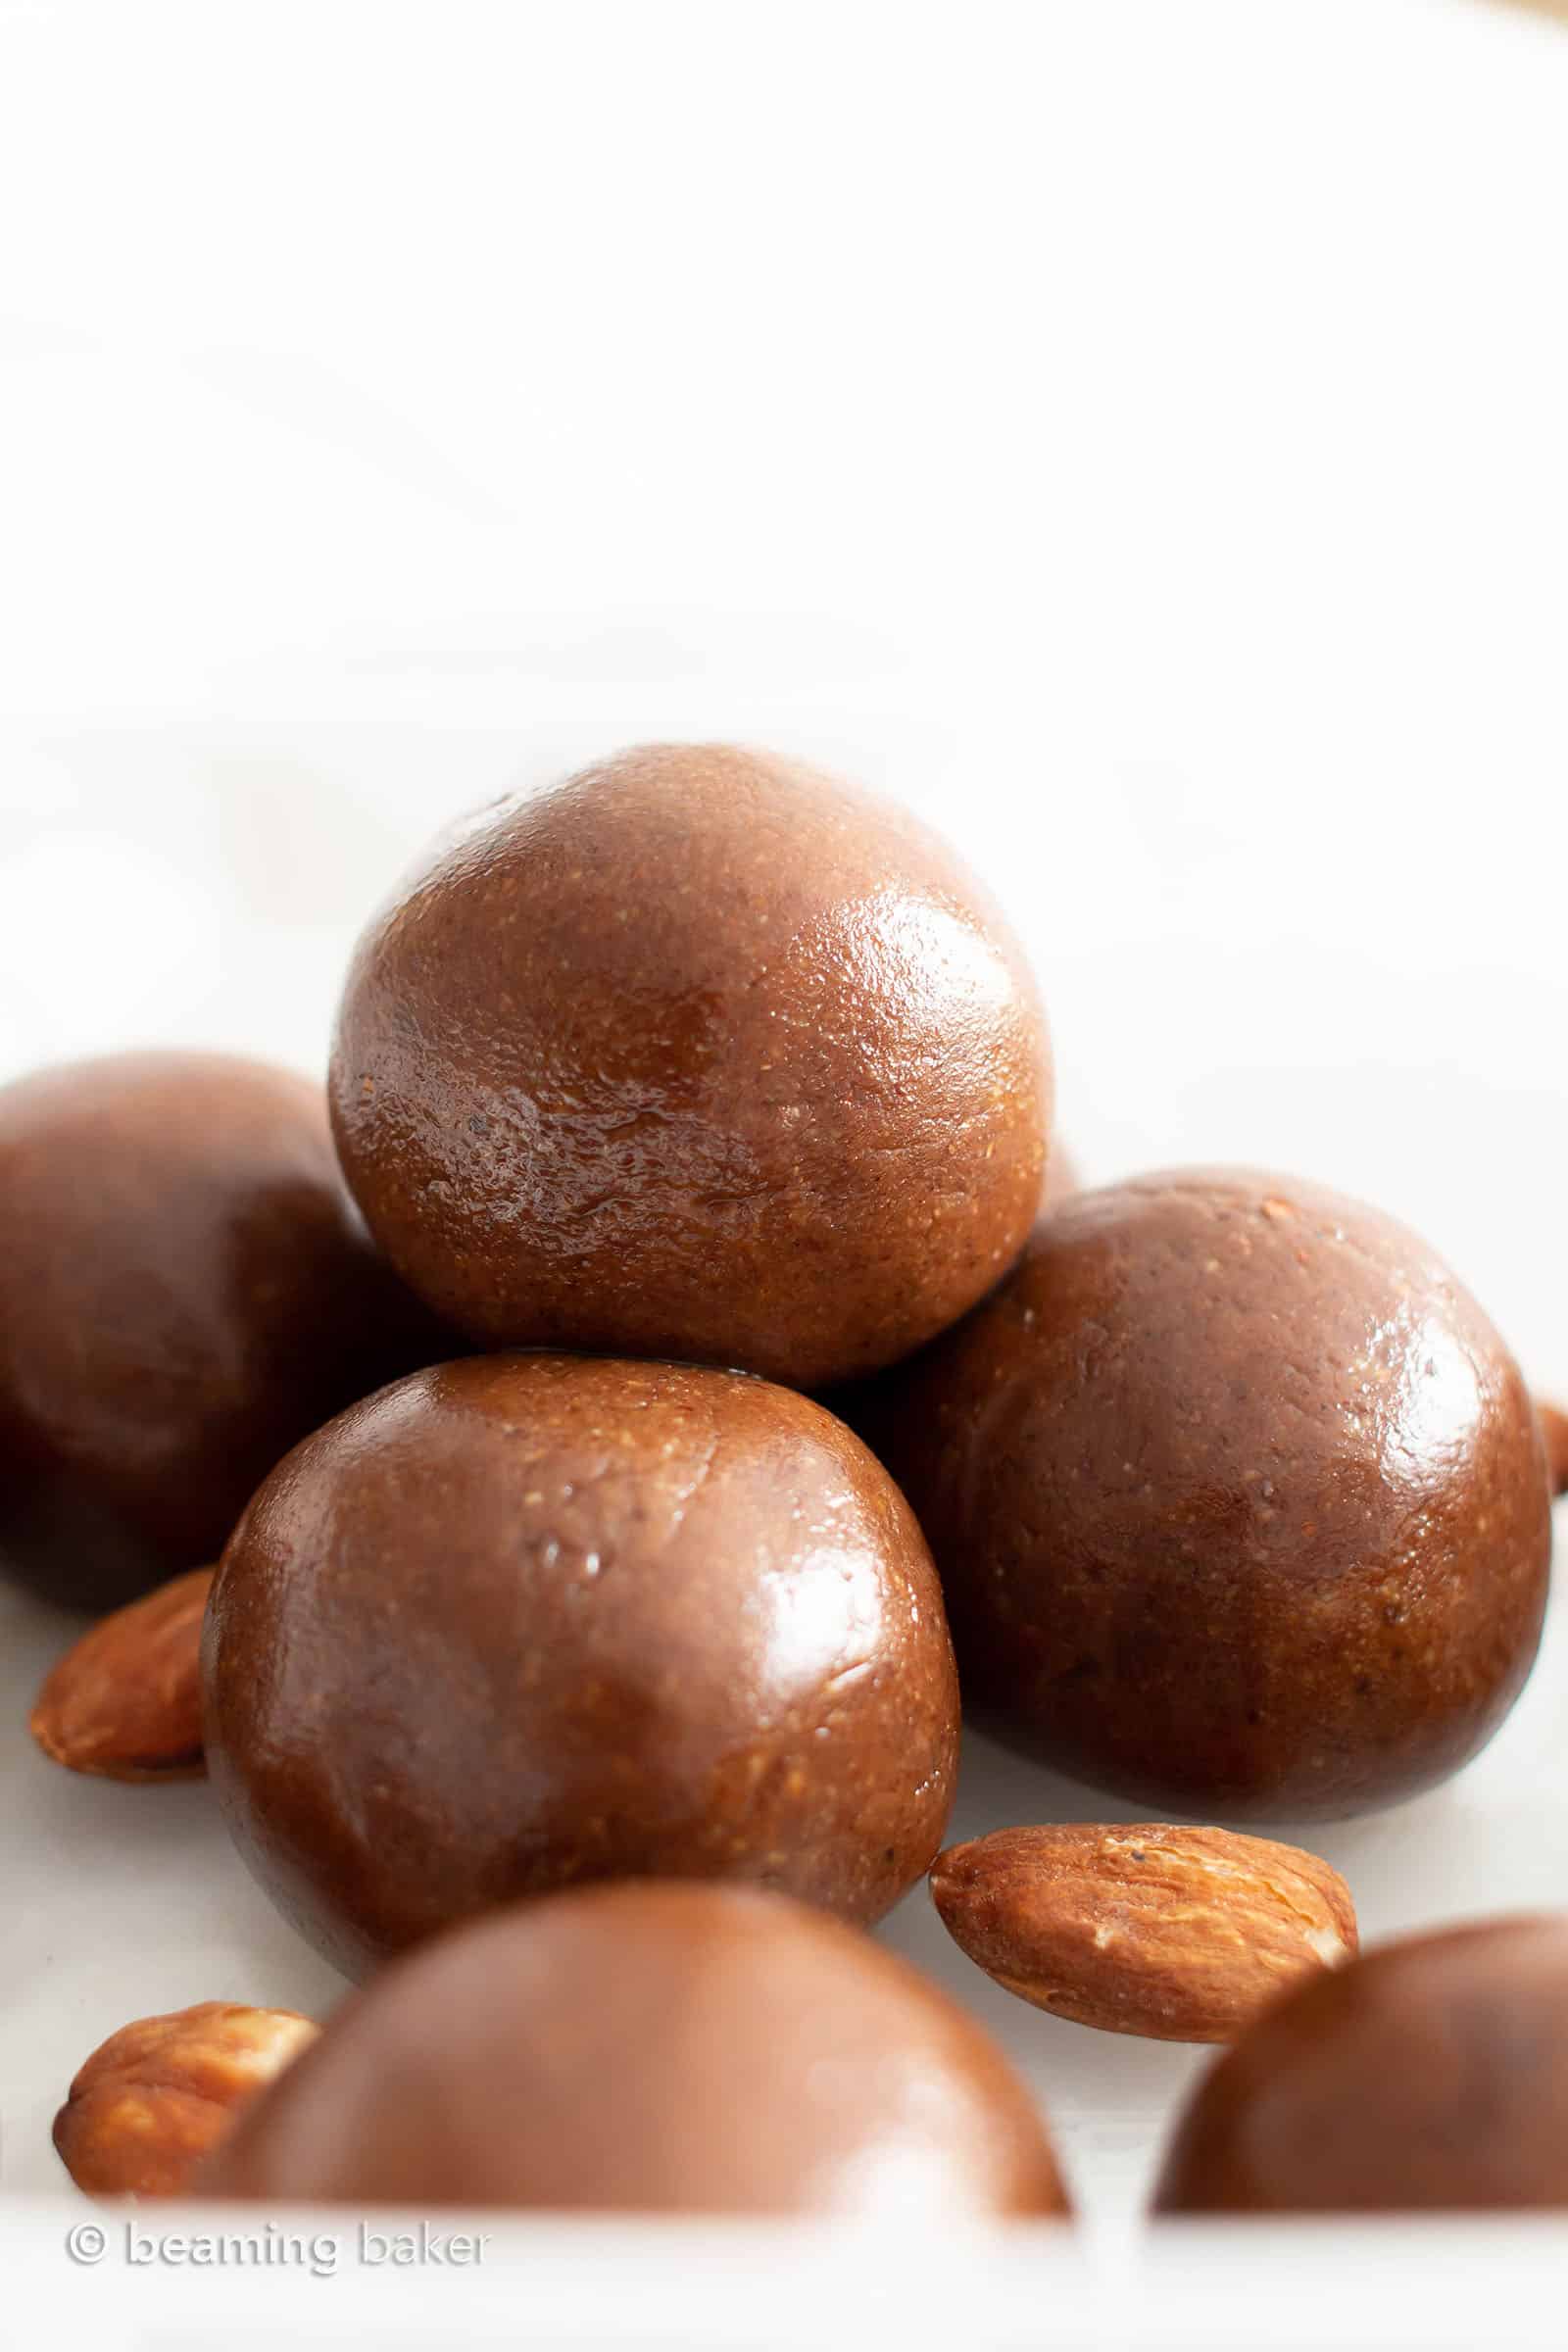 Paleo Energy Balls: just 4 ingredients for delicious, protein-packed healthy Almond Butter Balls—paleo recipe! These no bake energy balls are bursting with chocolate, vegan, gluten-free & dairy-free! #Paleo #Snacks #Vegan #GlutenFree | Recipe at BeamingBaker.com